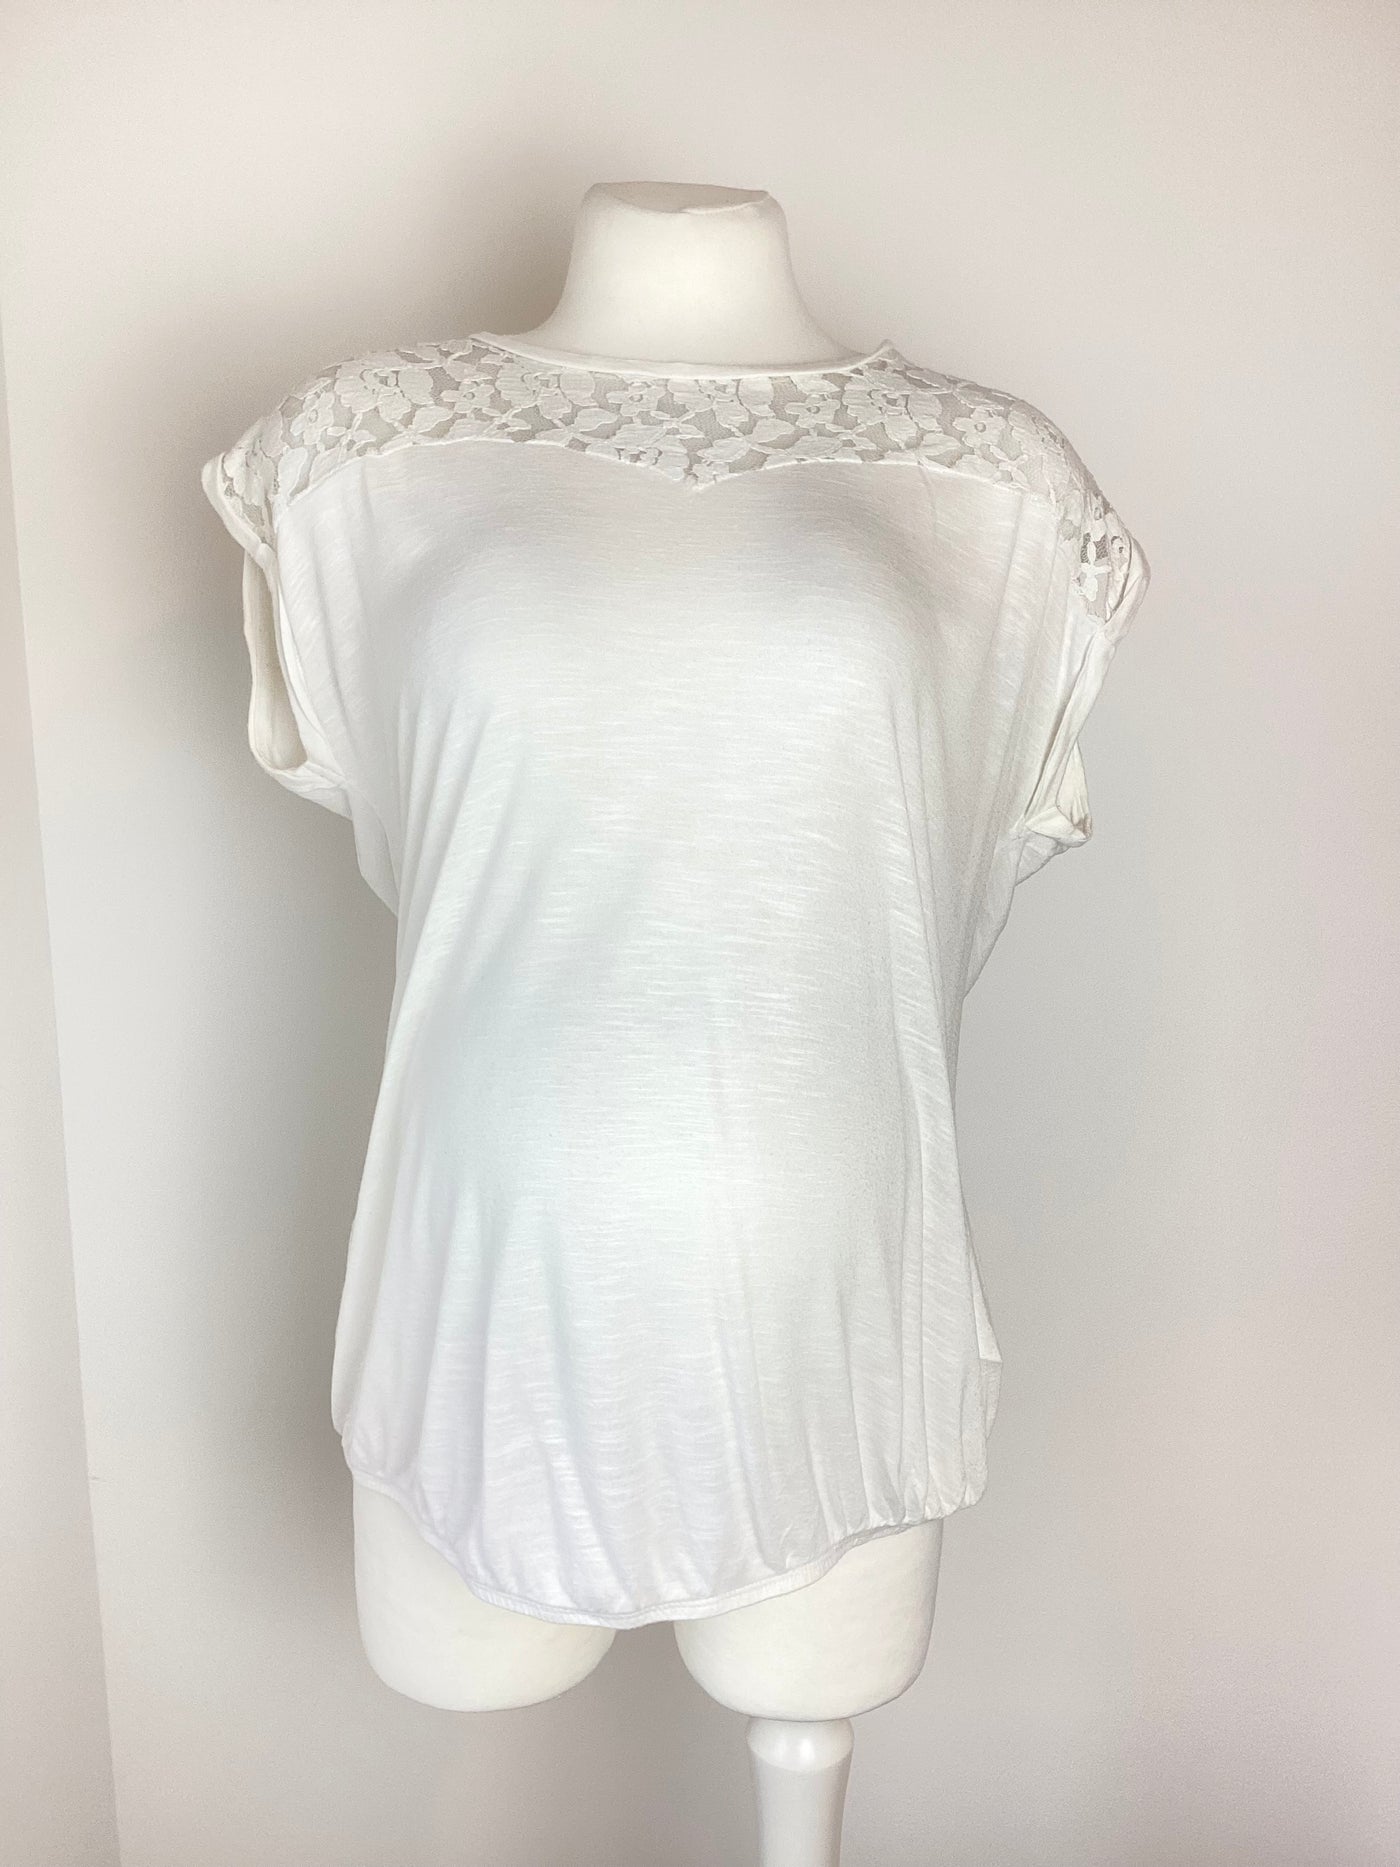 New Look Maternity cream sleeveless top with lace detail - Size 10